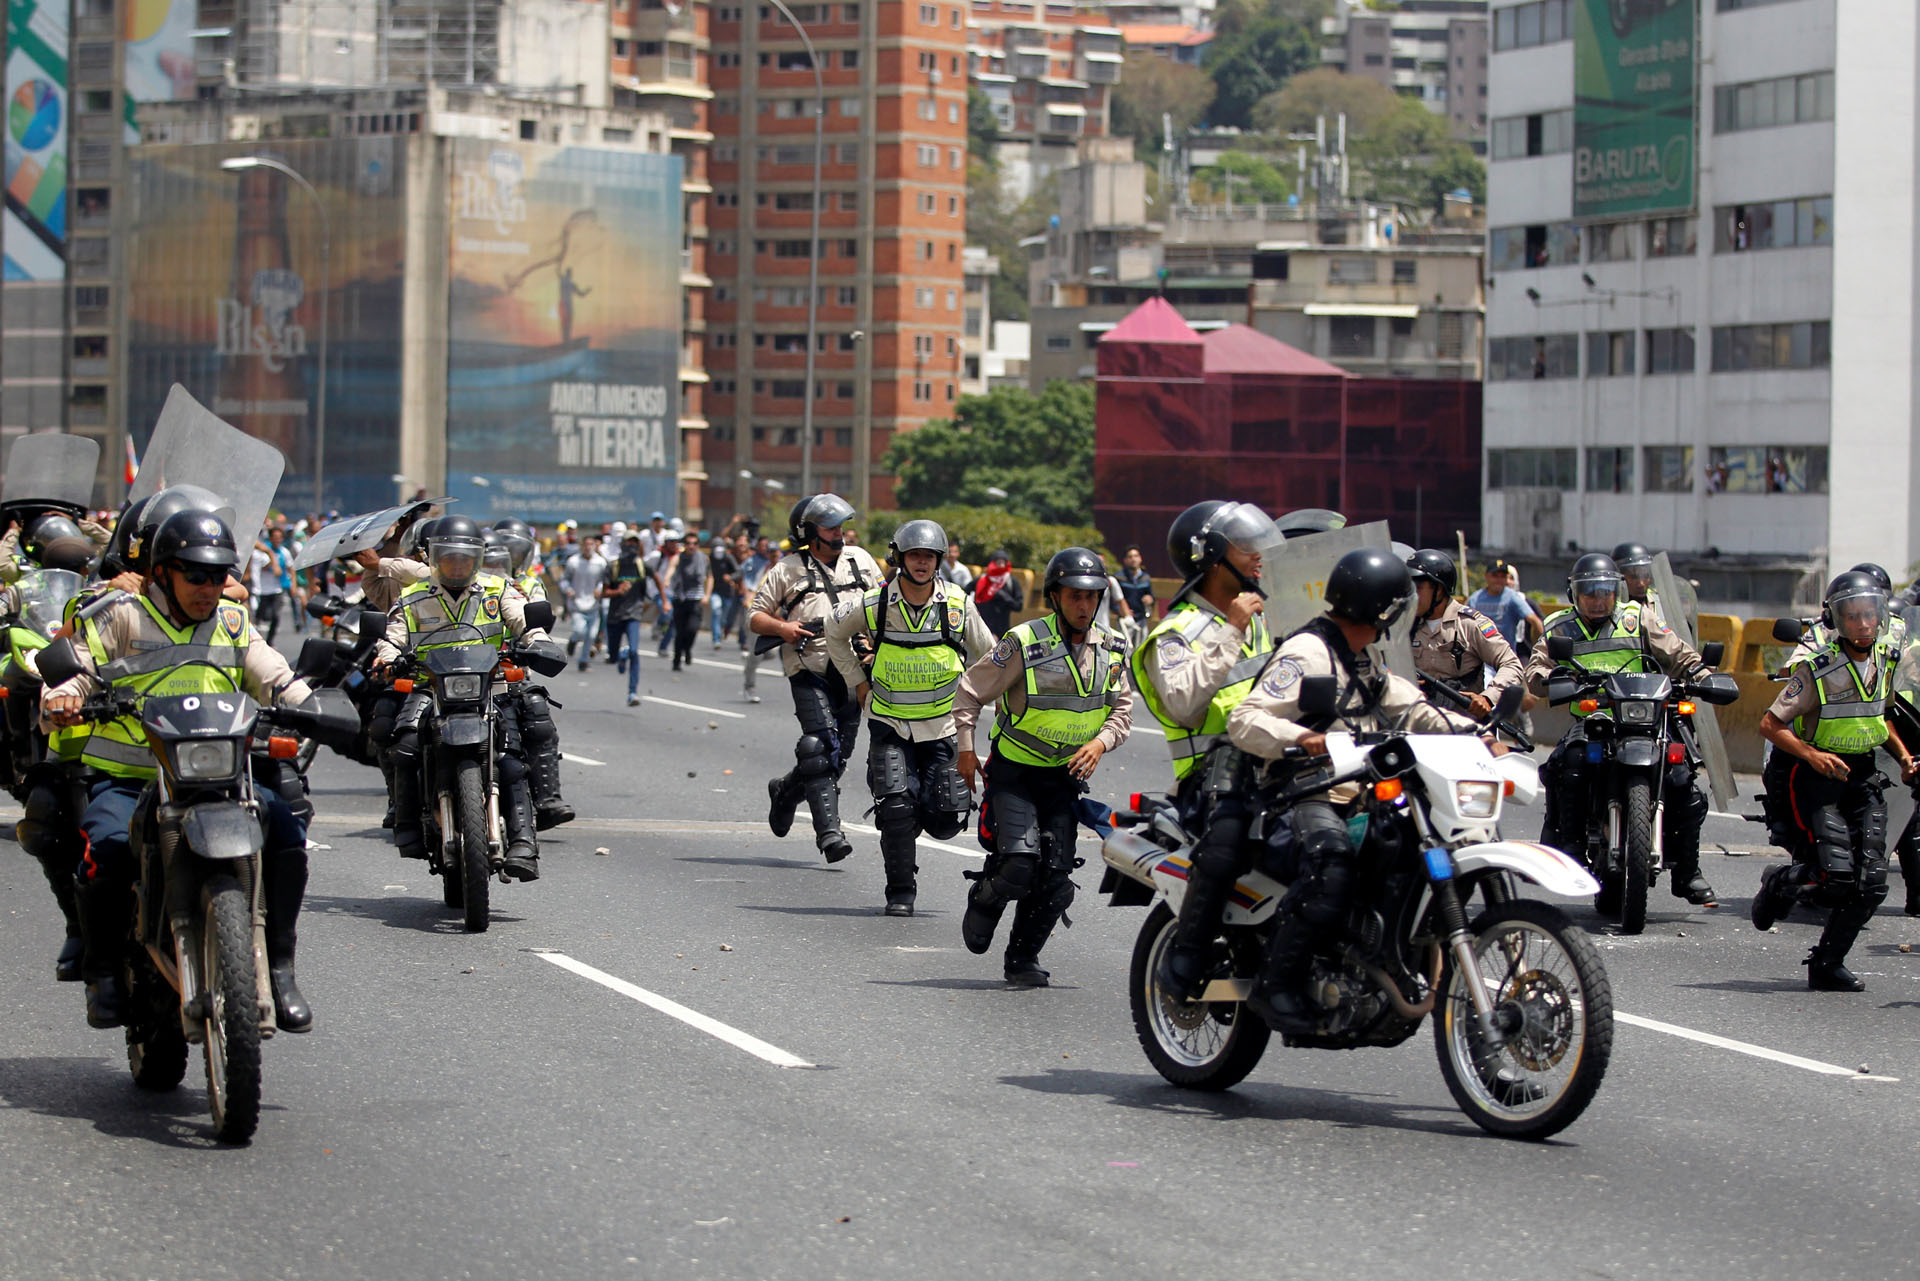 Police withdraw as demonstrators run toward them during an opposition rally in Caracas, Venezuela, April 6, 2017. REUTERS/Christian Veron